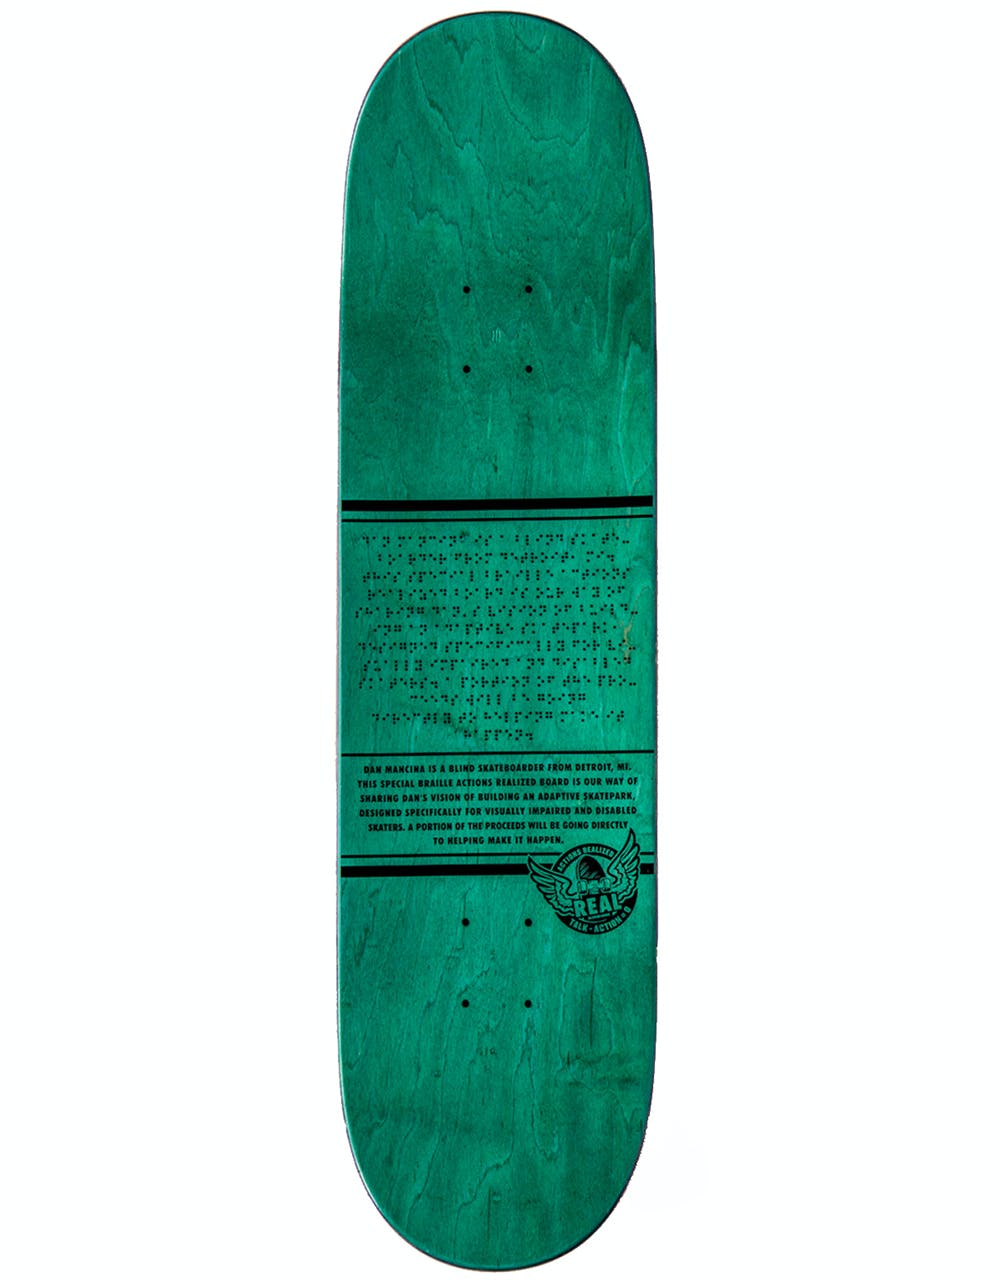 Real Mancina x Actions REALized Braile Skateboard Deck - 8.25"